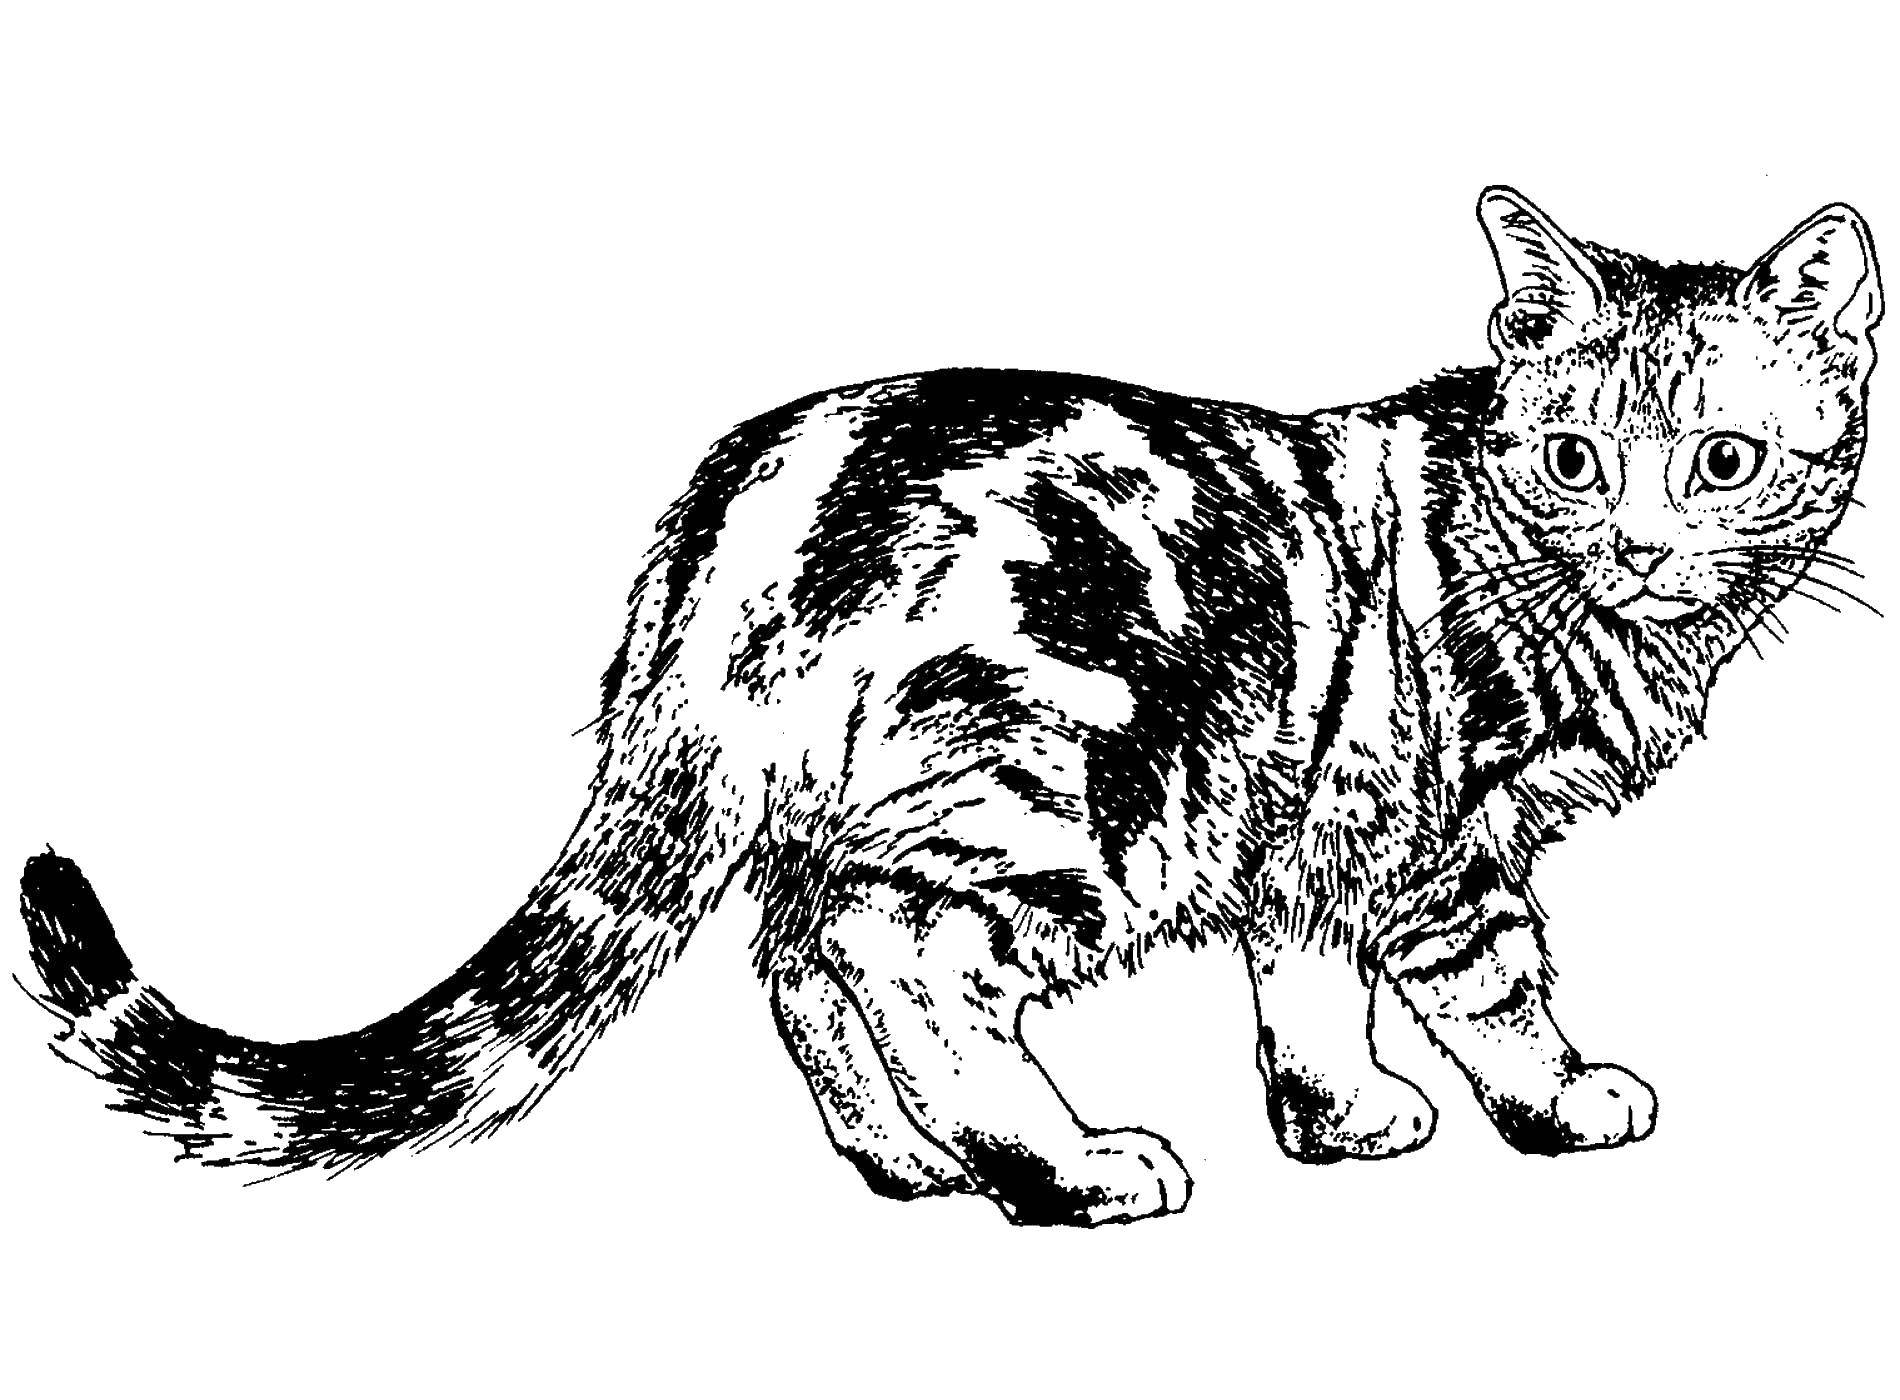 Coloring A real kitten. Category Cats and kittens. Tags:  animals, kitten, cat.